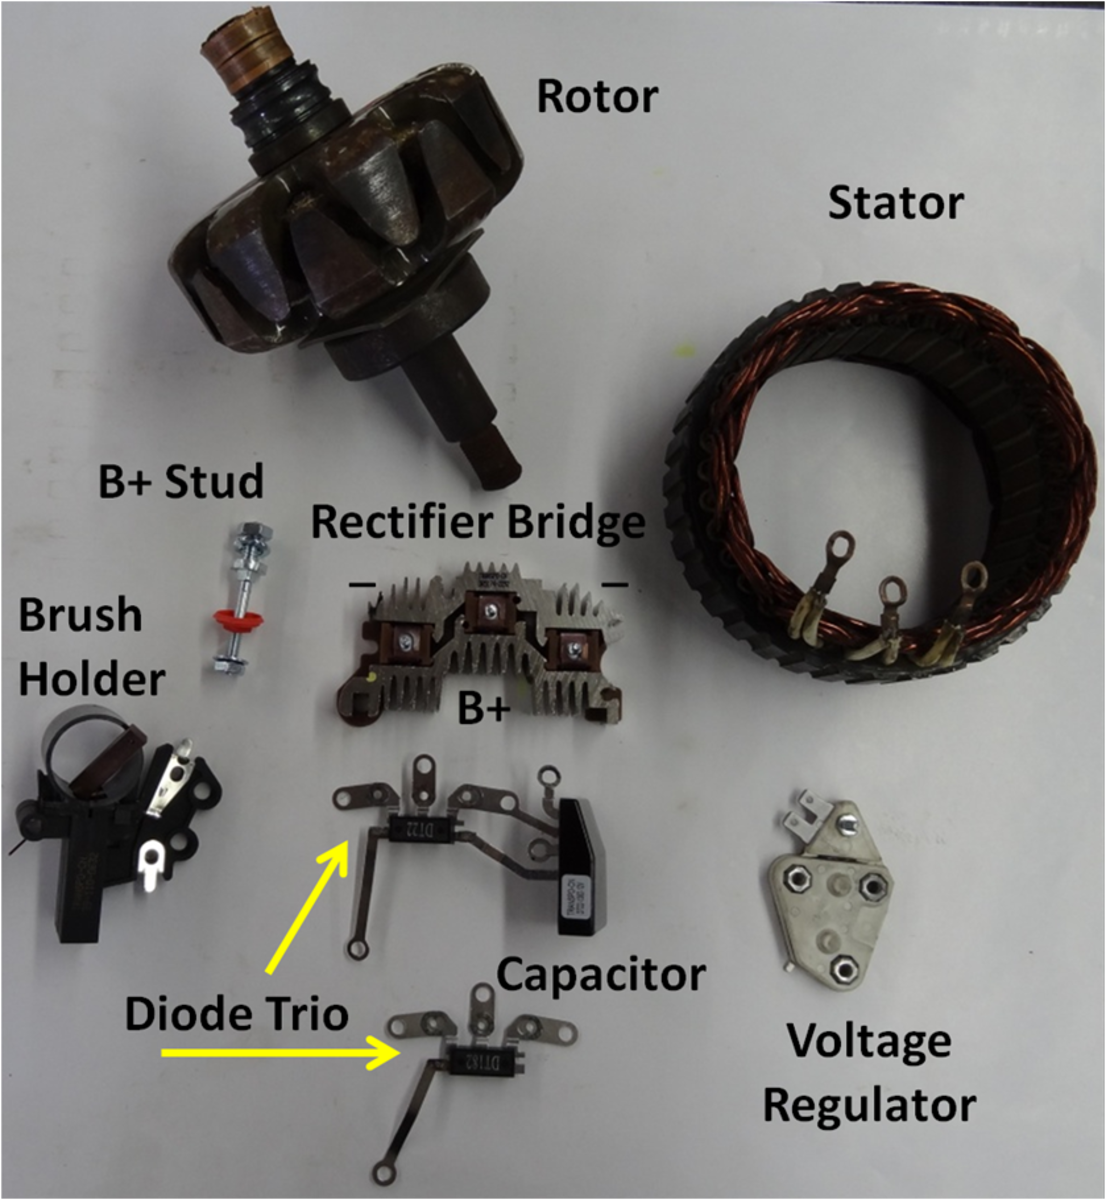 Internal components of a typical Delco/Remy Alternator.